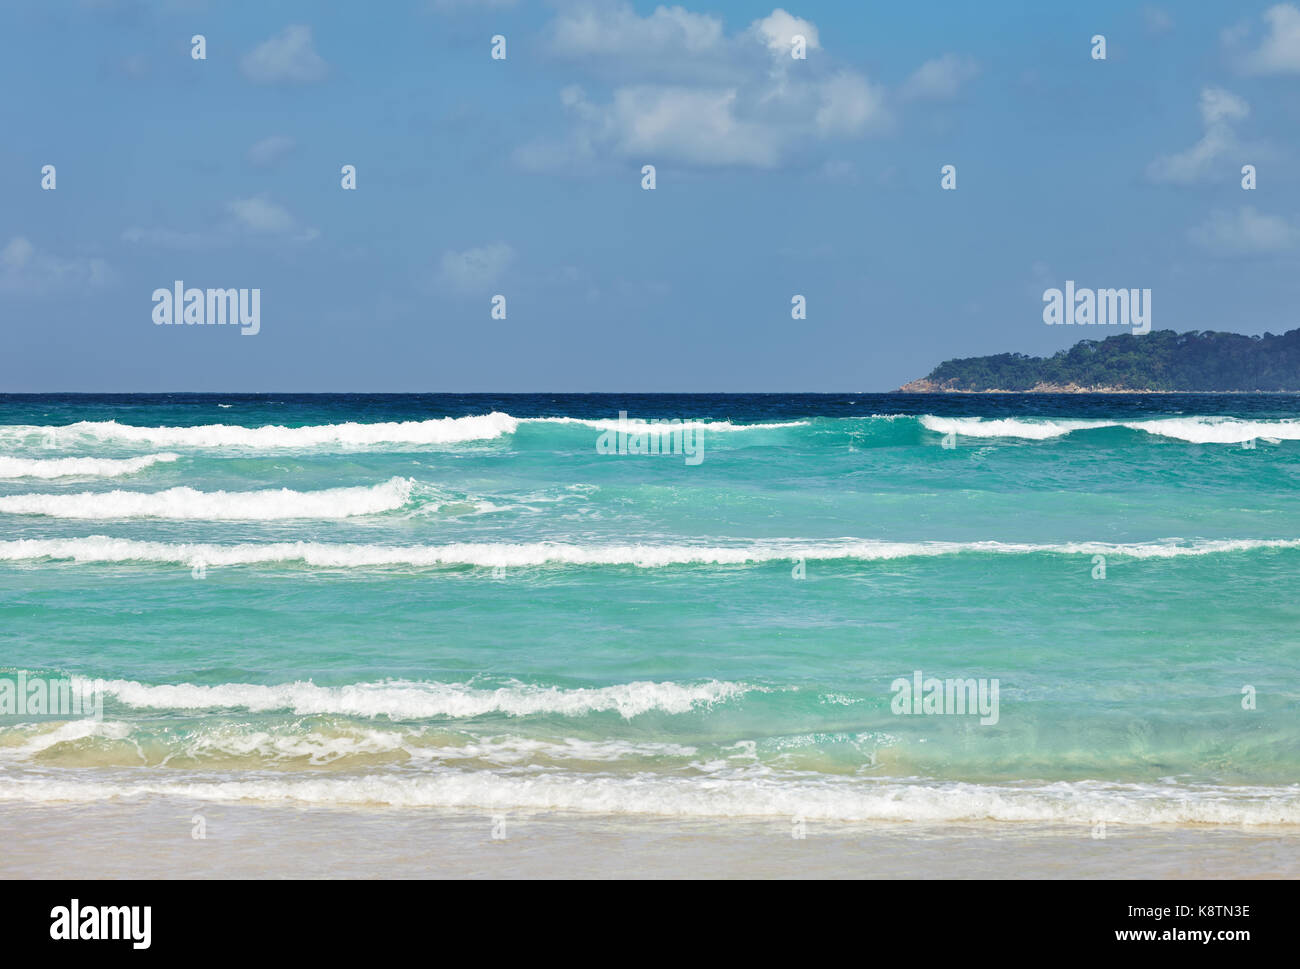 beautiful waves in the tropical sea Stock Photo